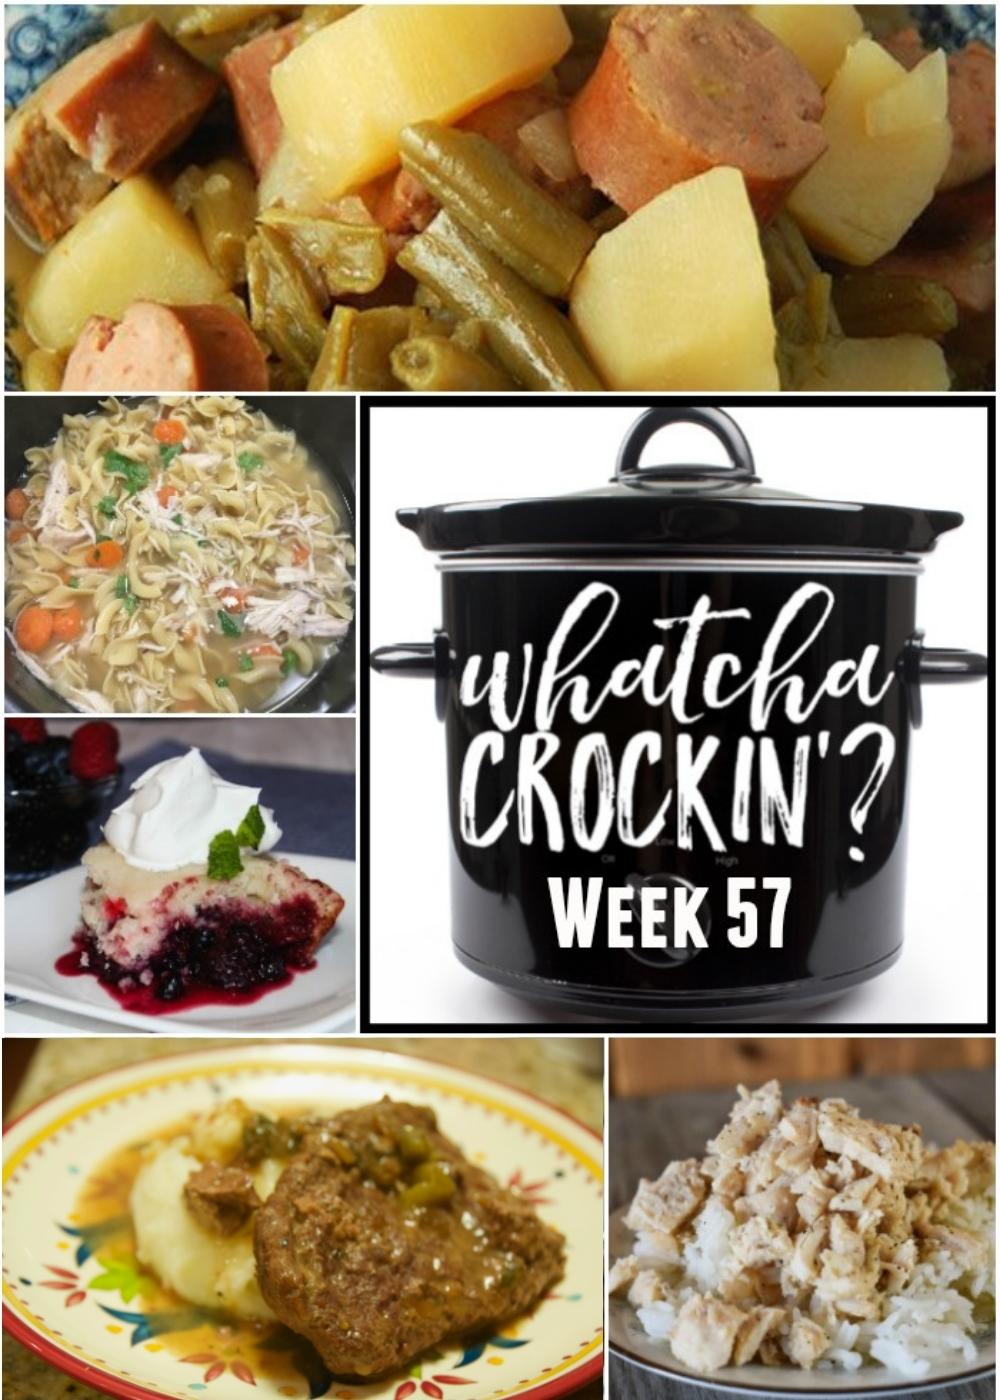 This week’s Whatcha Crockin’ crock pot recipes include Instant Pot Chicken Noodle Soup, Mixed Berry Dump Cake, Crock Pot Beef Cubed Steak, Crock Pot Sausage, Green Beans and Potatoes, Instant Pot Buttery Chicken, Crock Pot Chili Con Queso, Amazing Crock Pot Caramel Sweet Rolls and many more!